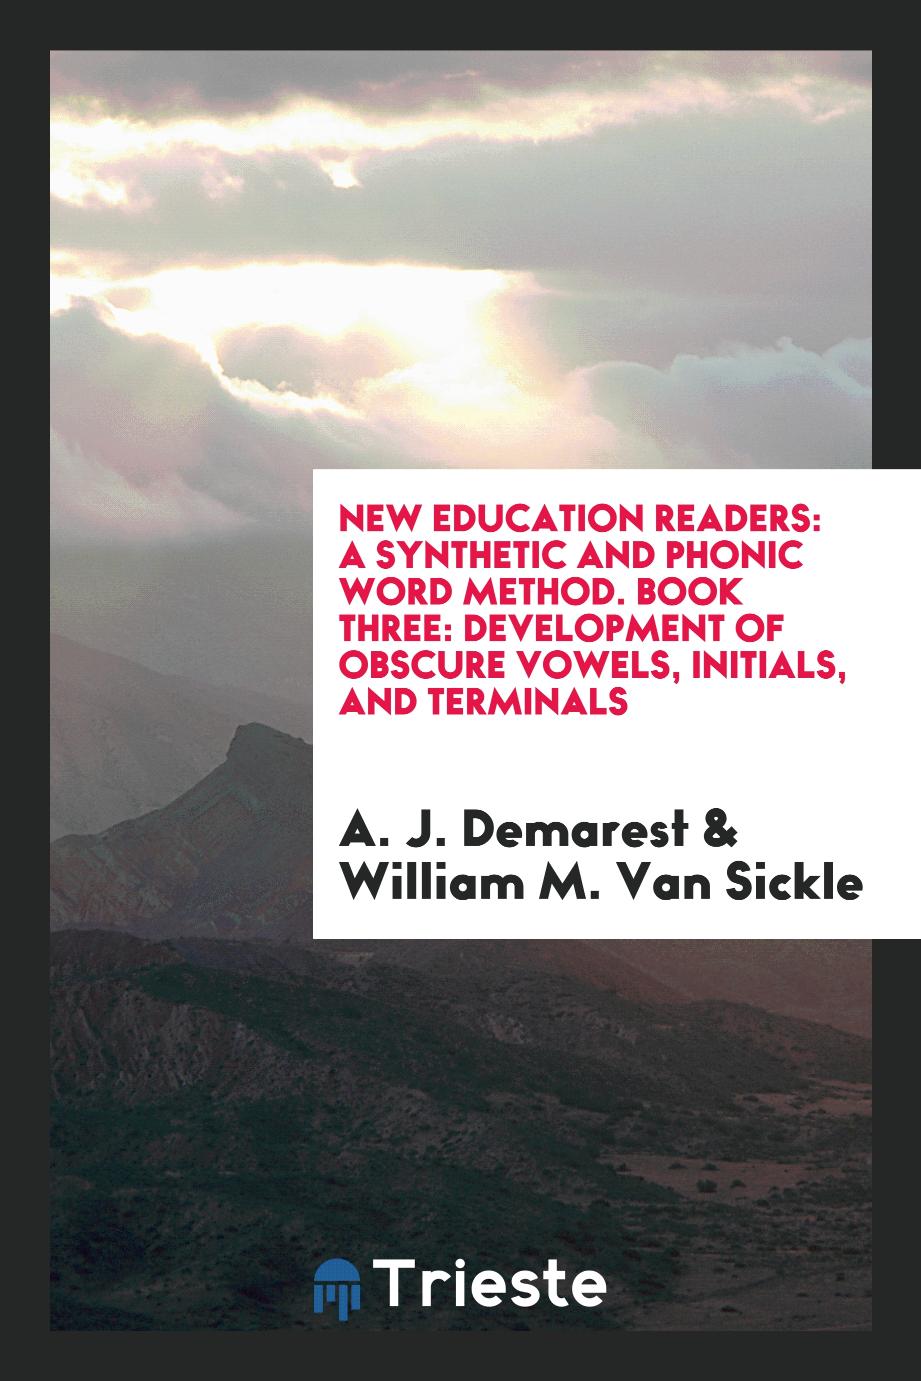 New Education Readers: A Synthetic and Phonic Word Method. Book Three: Development of Obscure Vowels, Initials, and Terminals